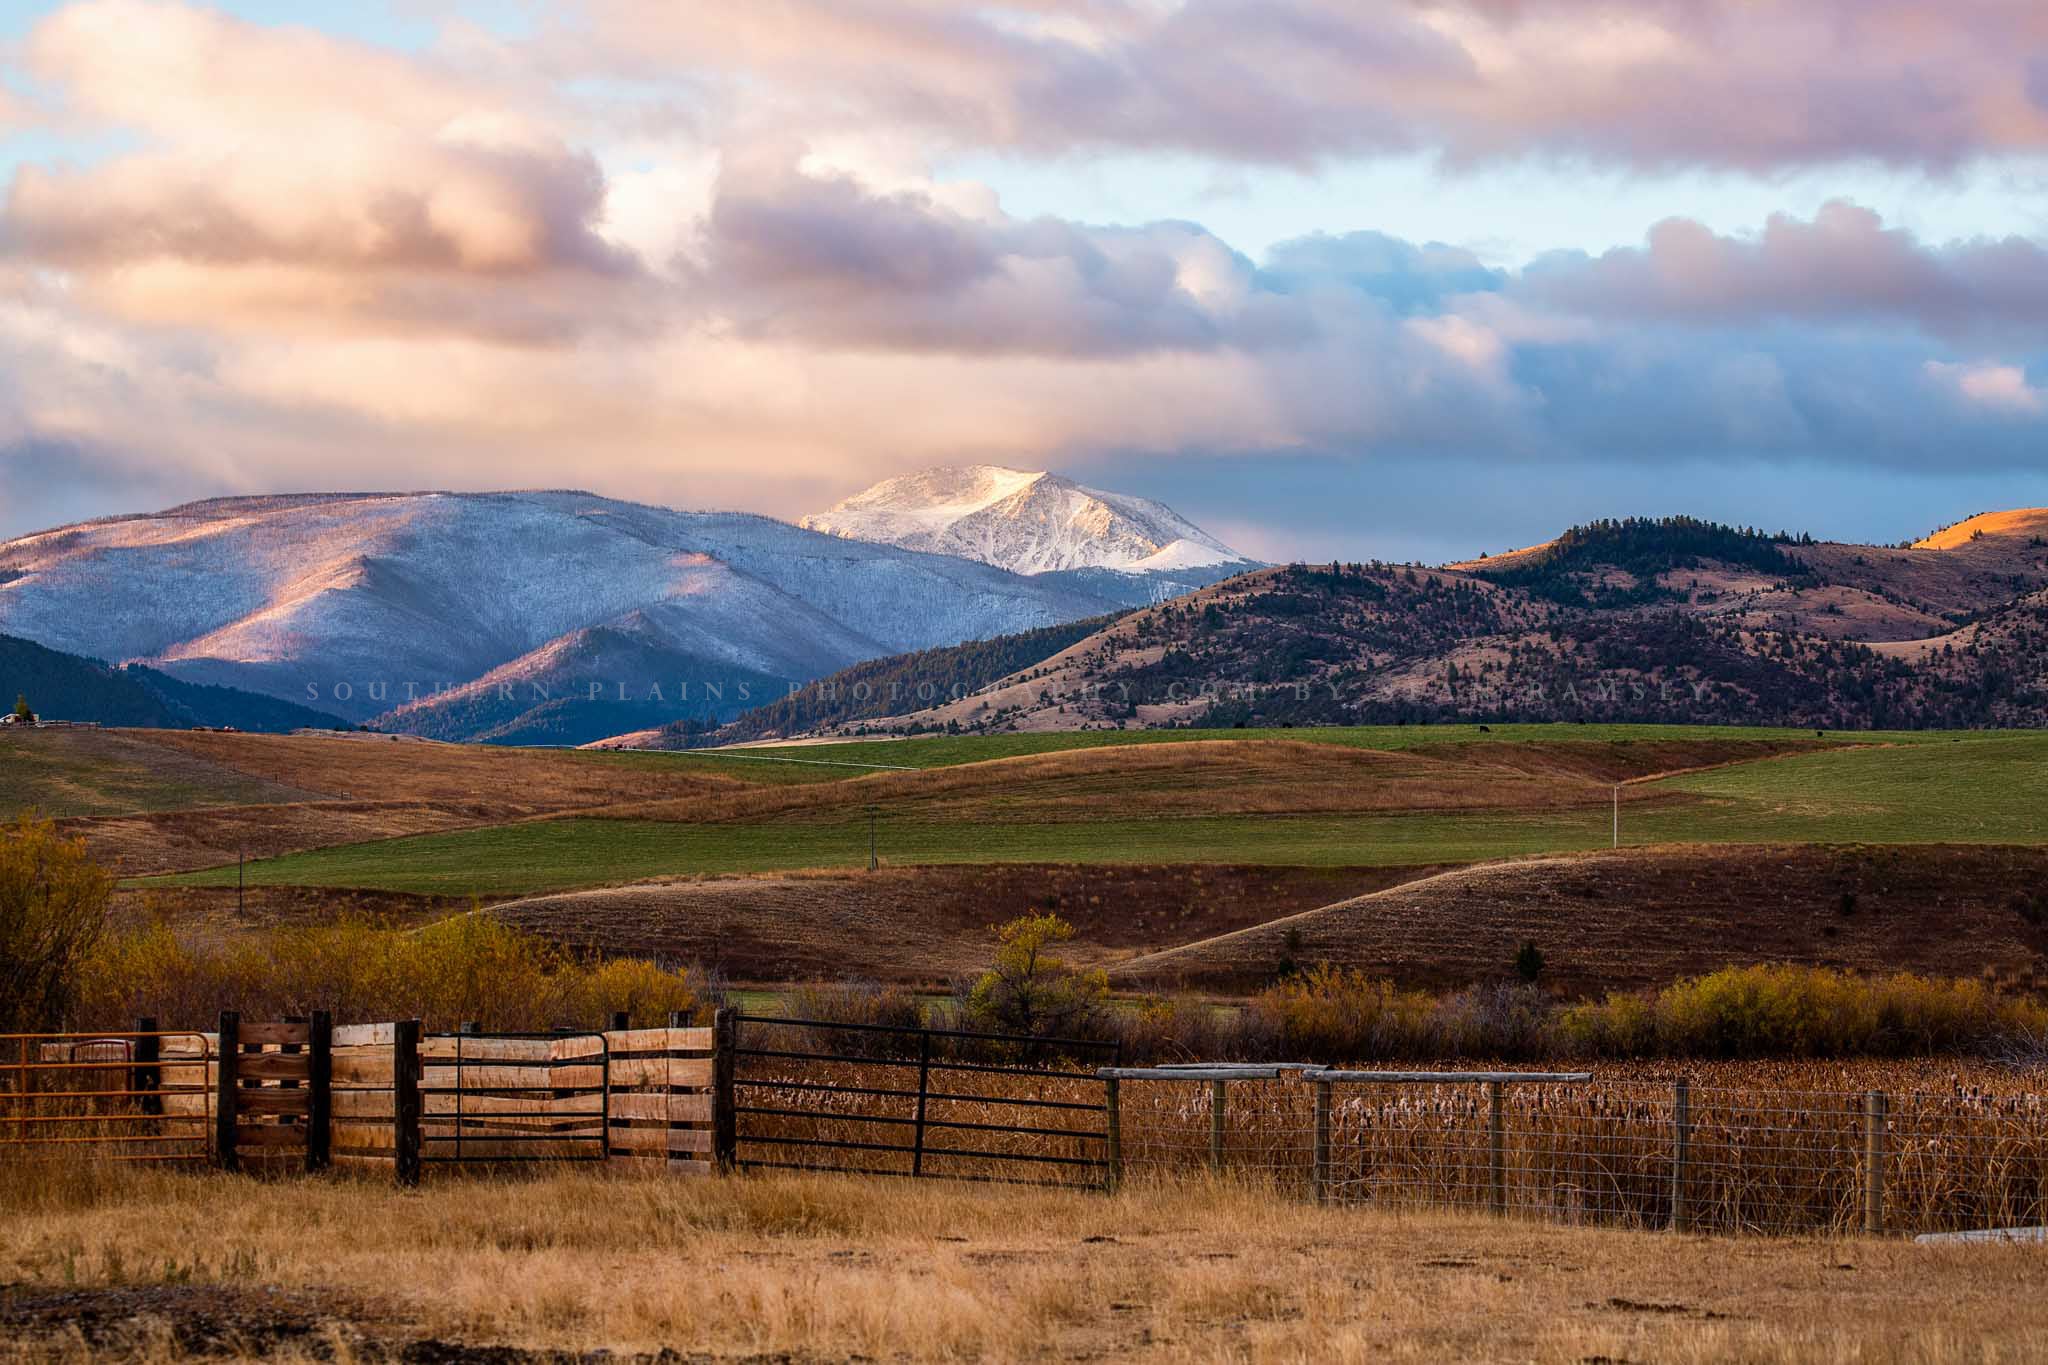 Rocky Mountain landscape photography print of a snowy mountain peak overlooking a valley on an autumn morning in Montana by Sean Ramsey of Southern Plains Photography.